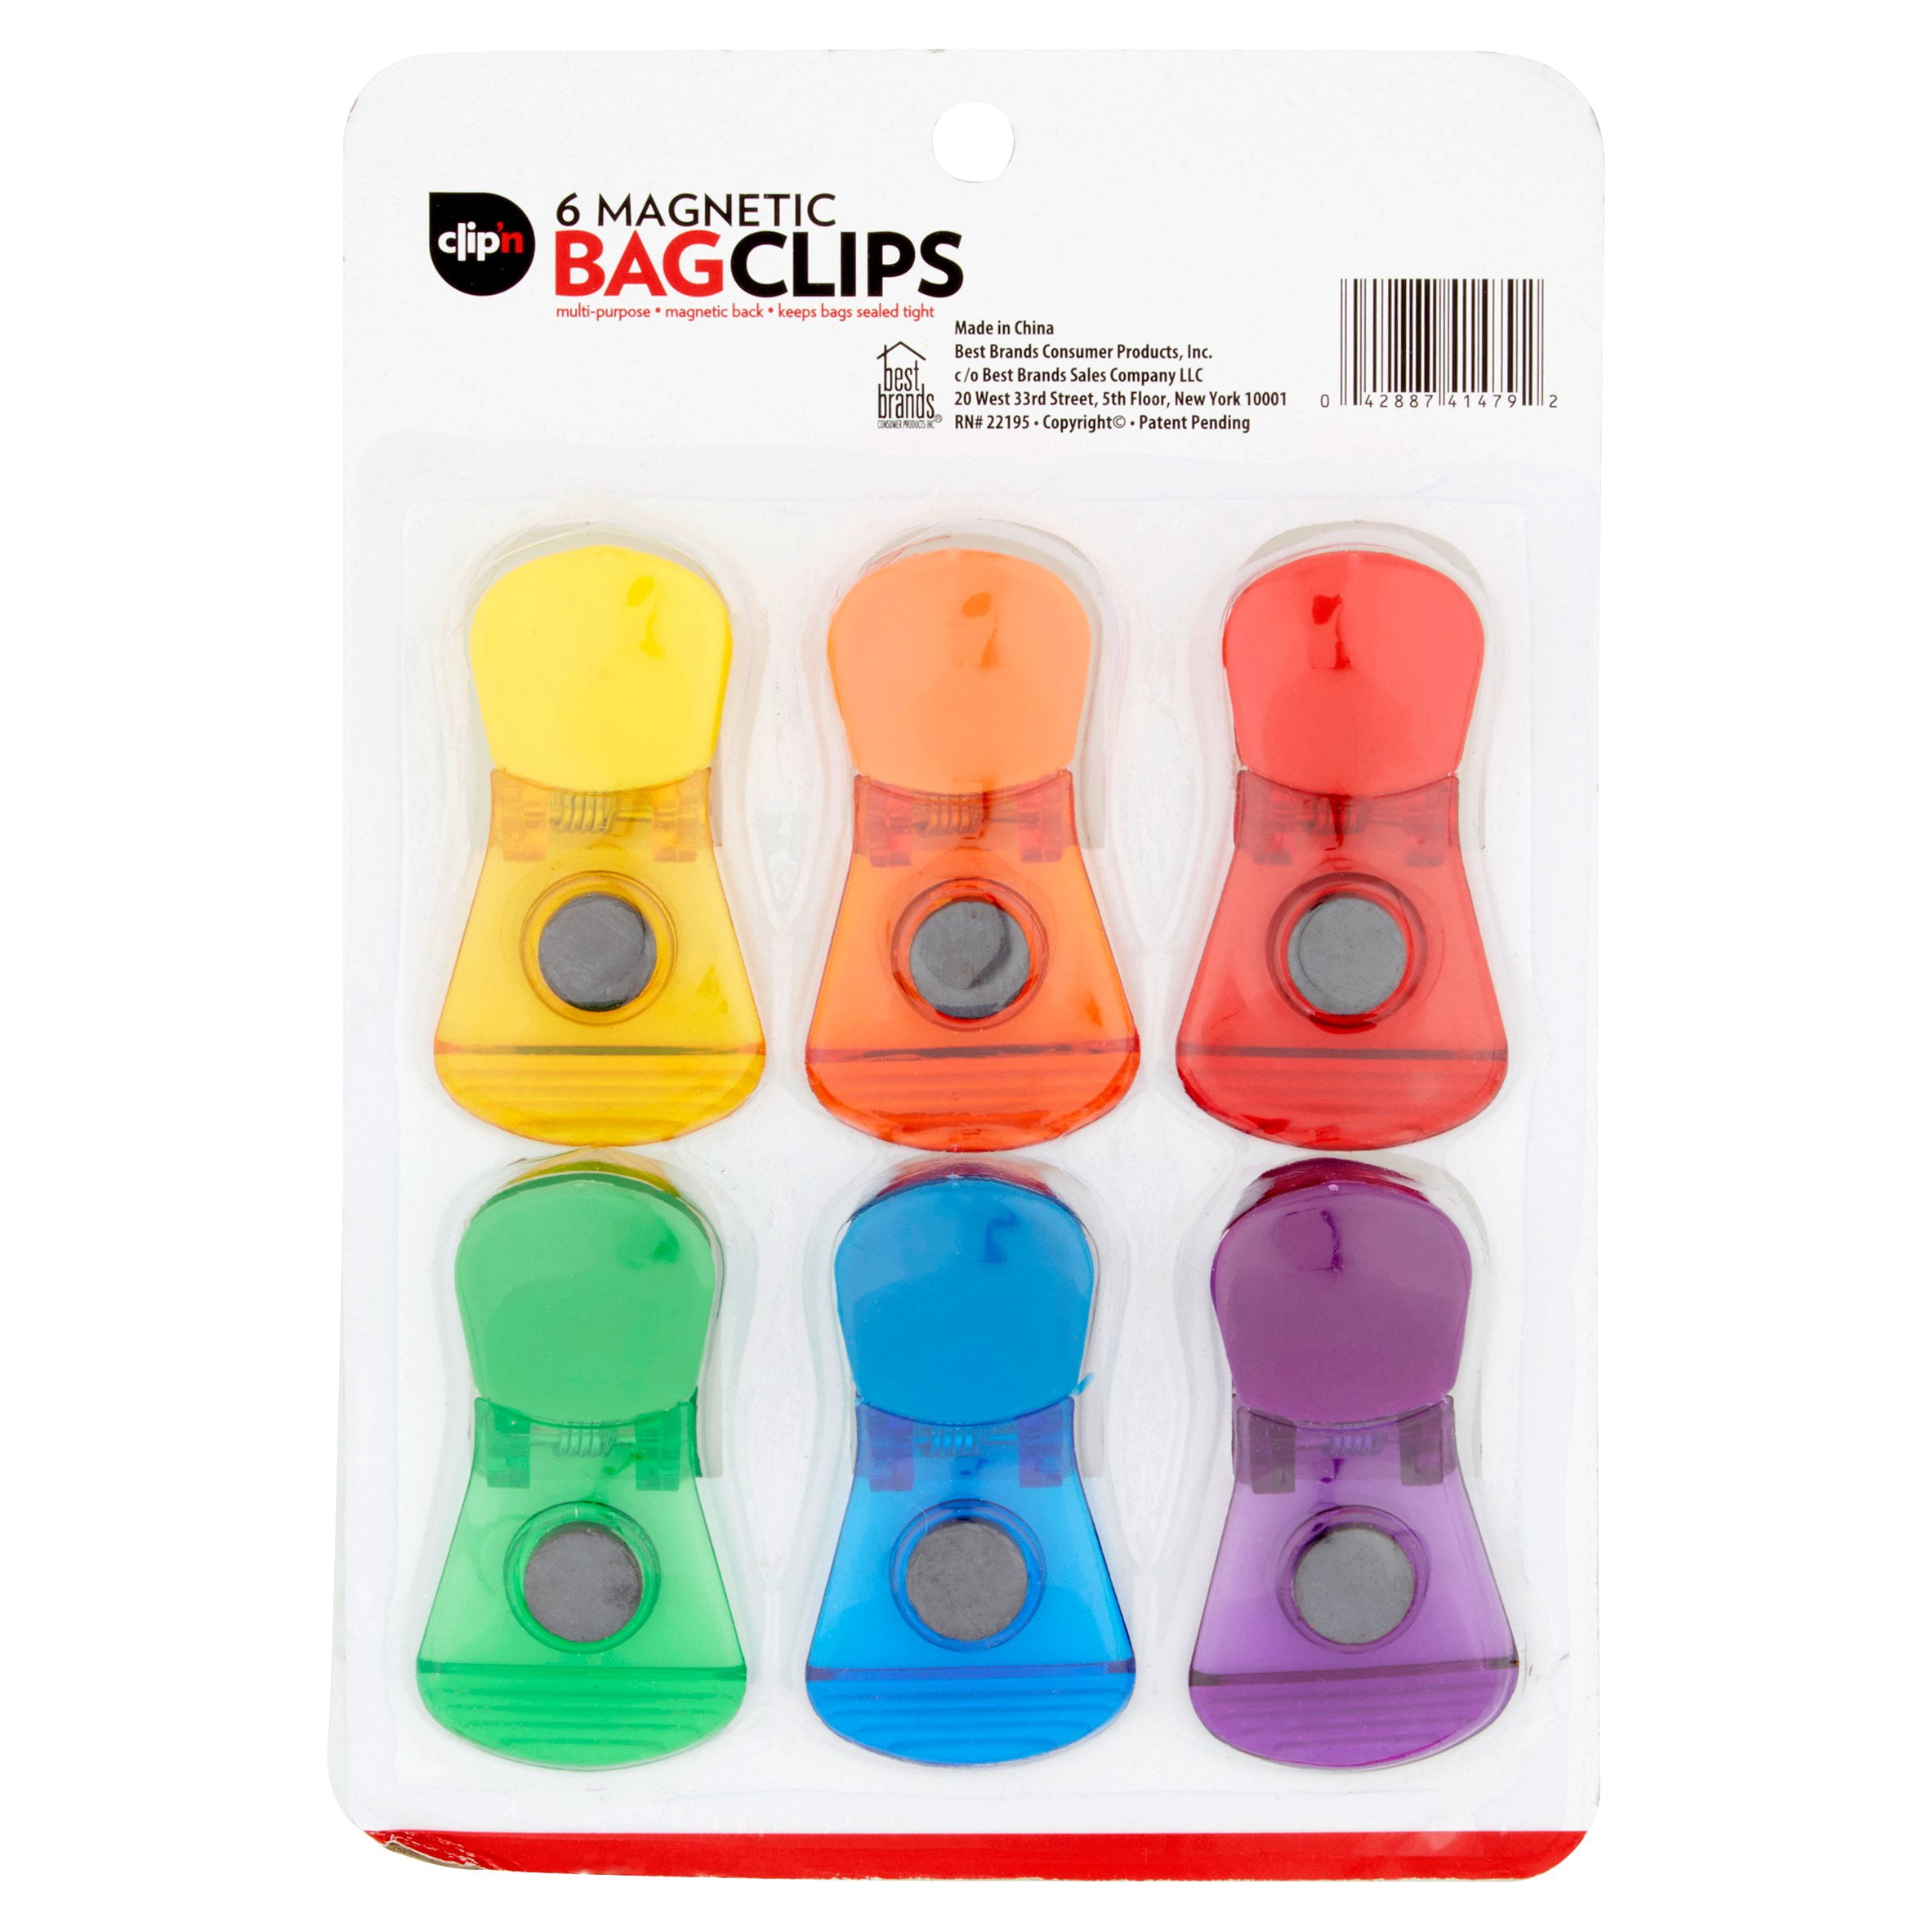 Mr. Pen- Chip Bag Clips, Magnetic Clips, 4 Pack, 5 Inches Wide, Heavy Duty,  Bag Clips, Bag Clips for Food, Magnet Clips, Chip Clips, Bag Clips, Food